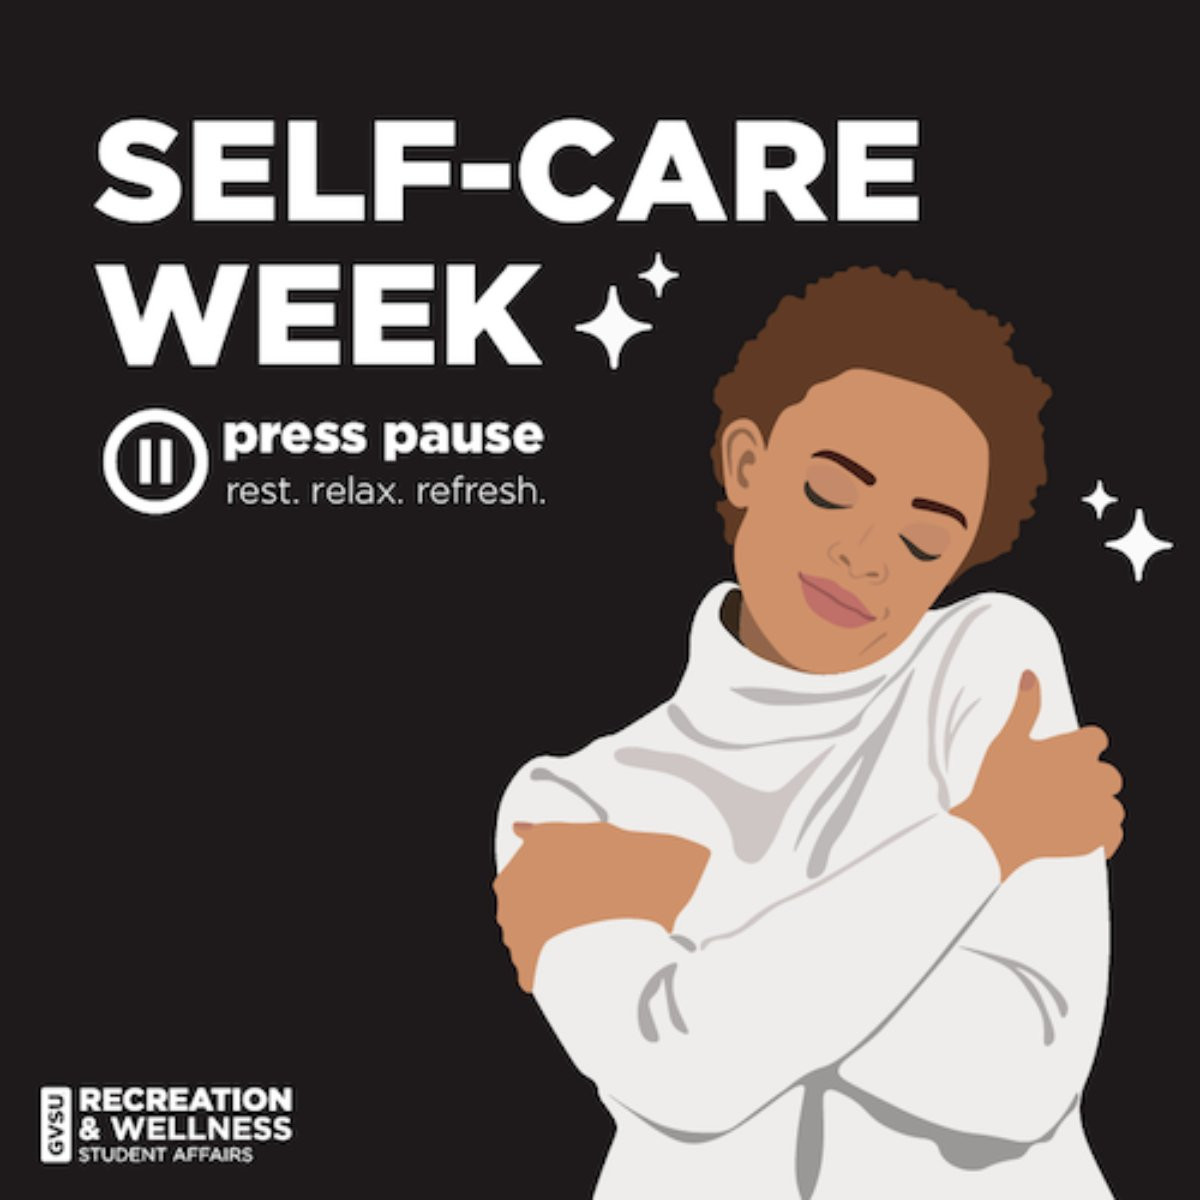 A person hugging herself with text that says Self-Care Week with a Pause sign and Press Pause Rest. Relax. Refresh. and the GVSU RecWell logo in the bottom right corner